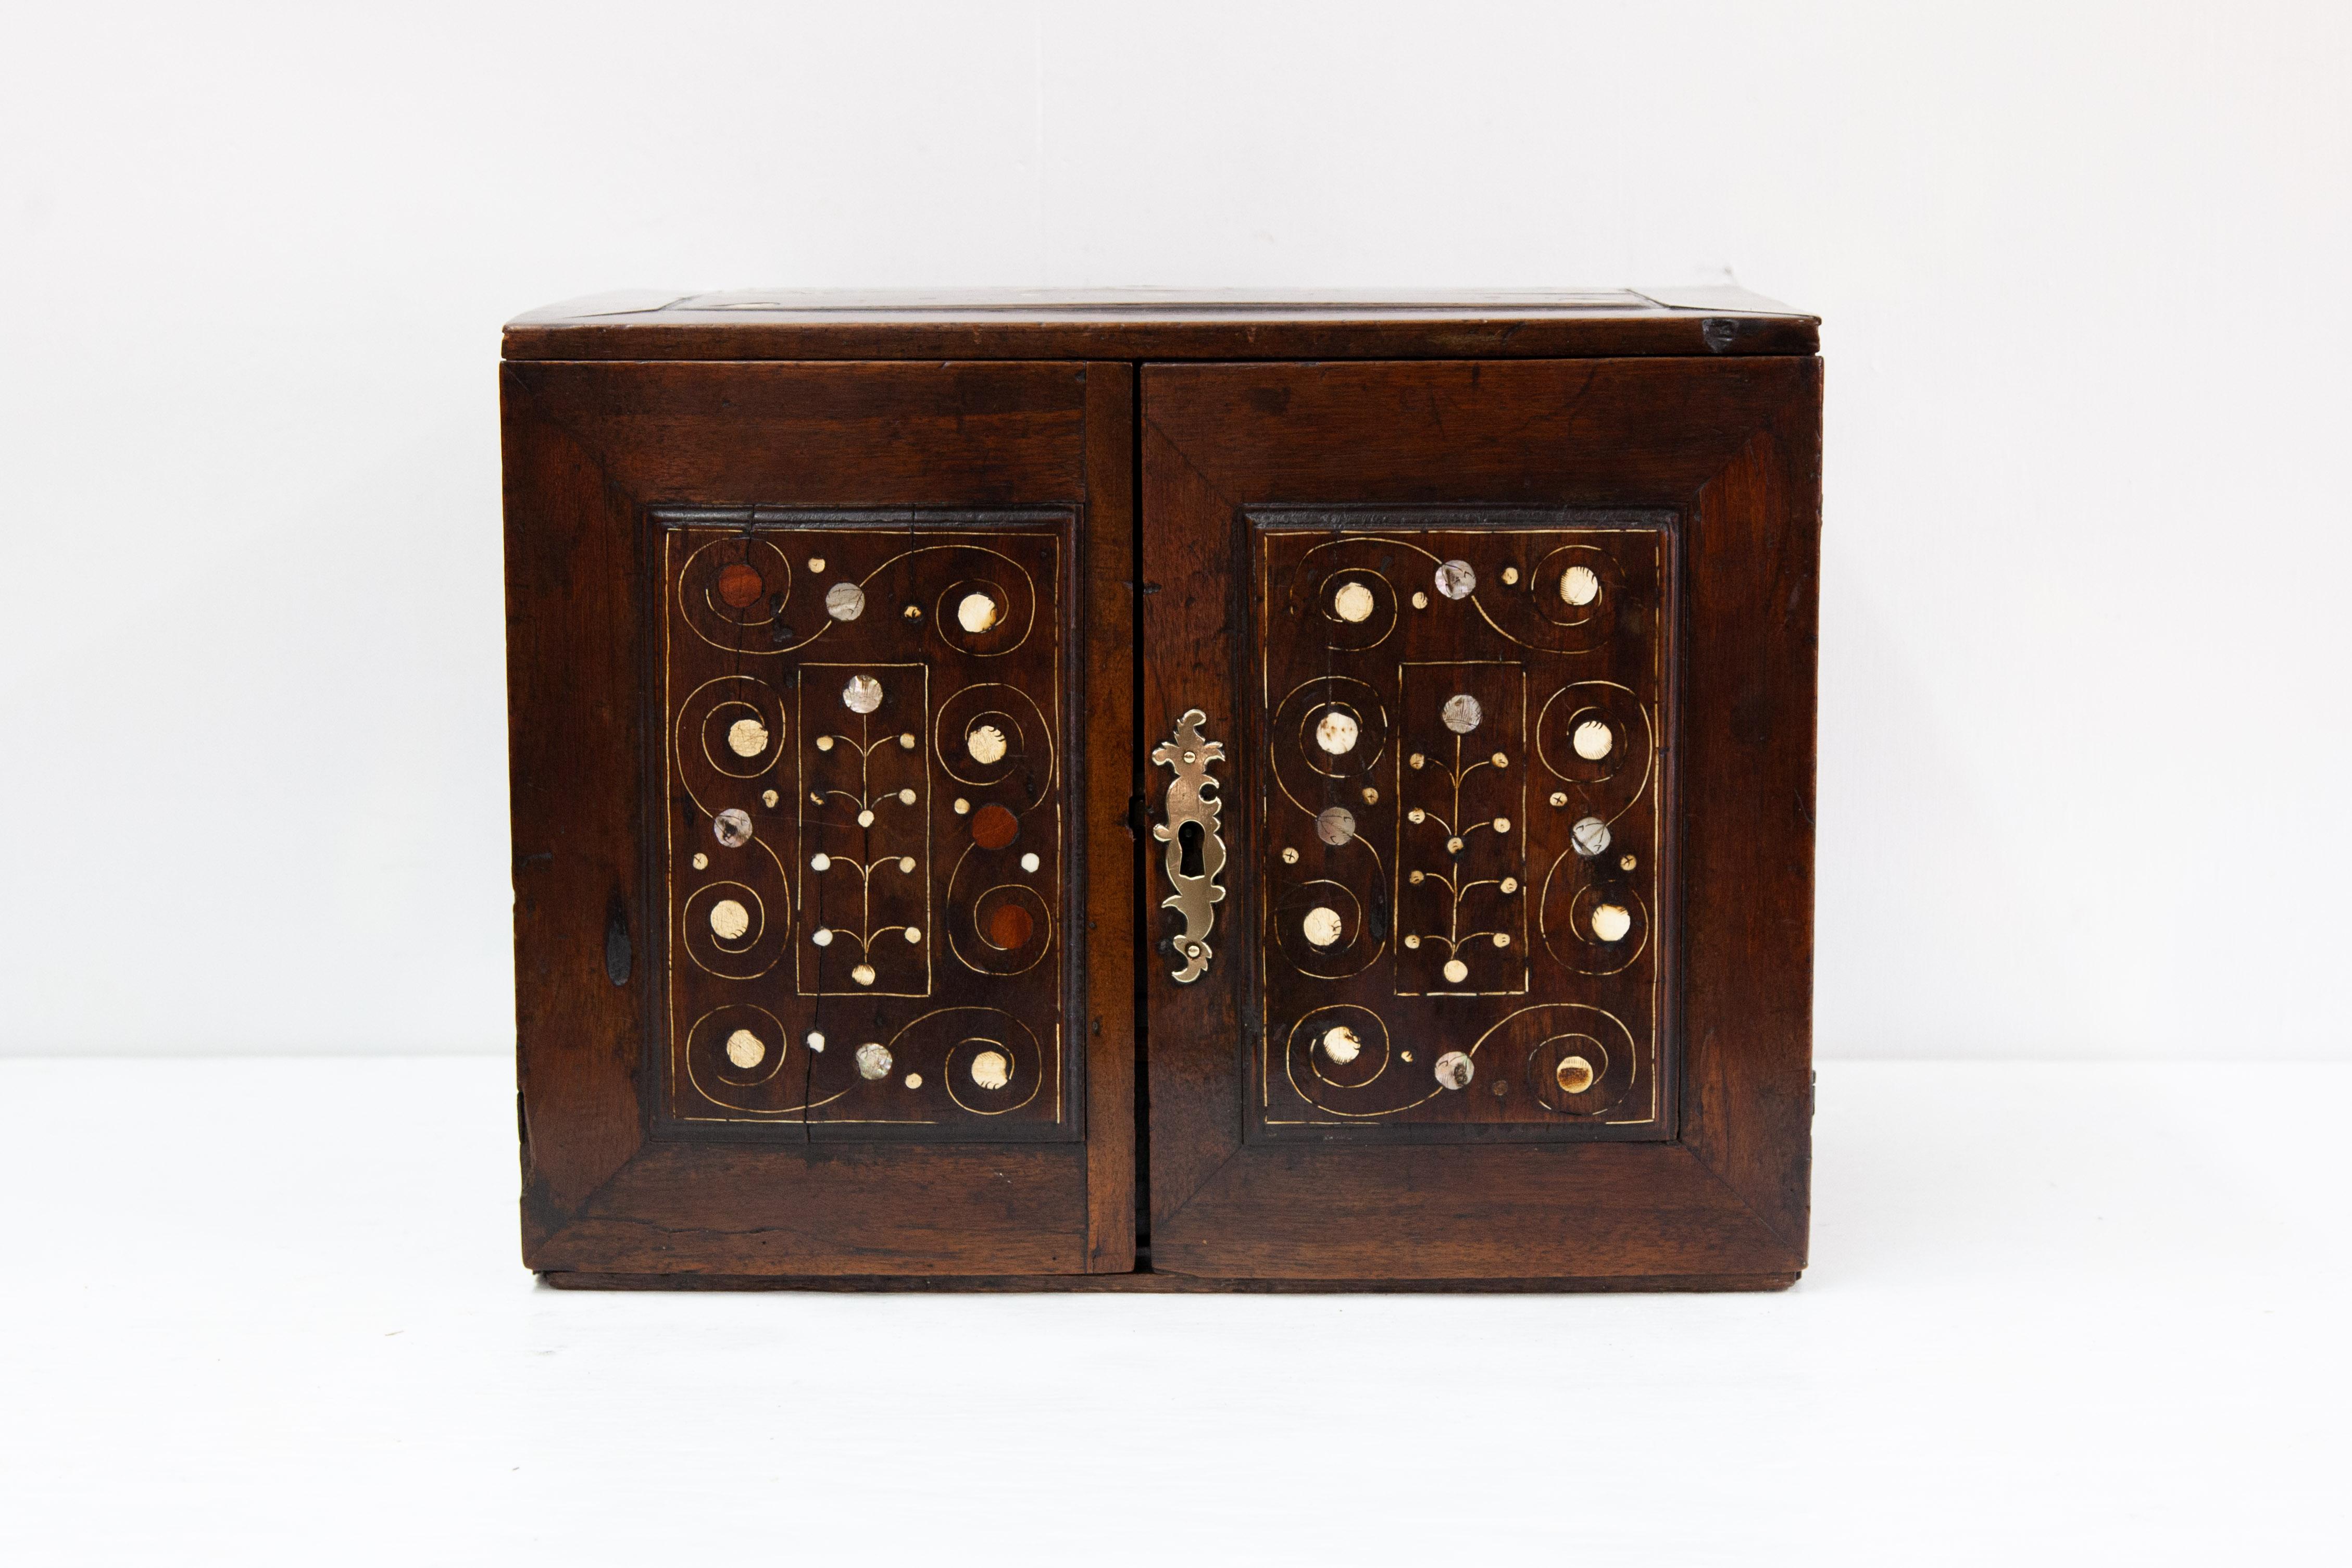 18th century inlaid walnut fitted cabinet, the top, front and sides having inset panels with whimsical inlays, the banded interior drawers inlaid with mother of pearl.